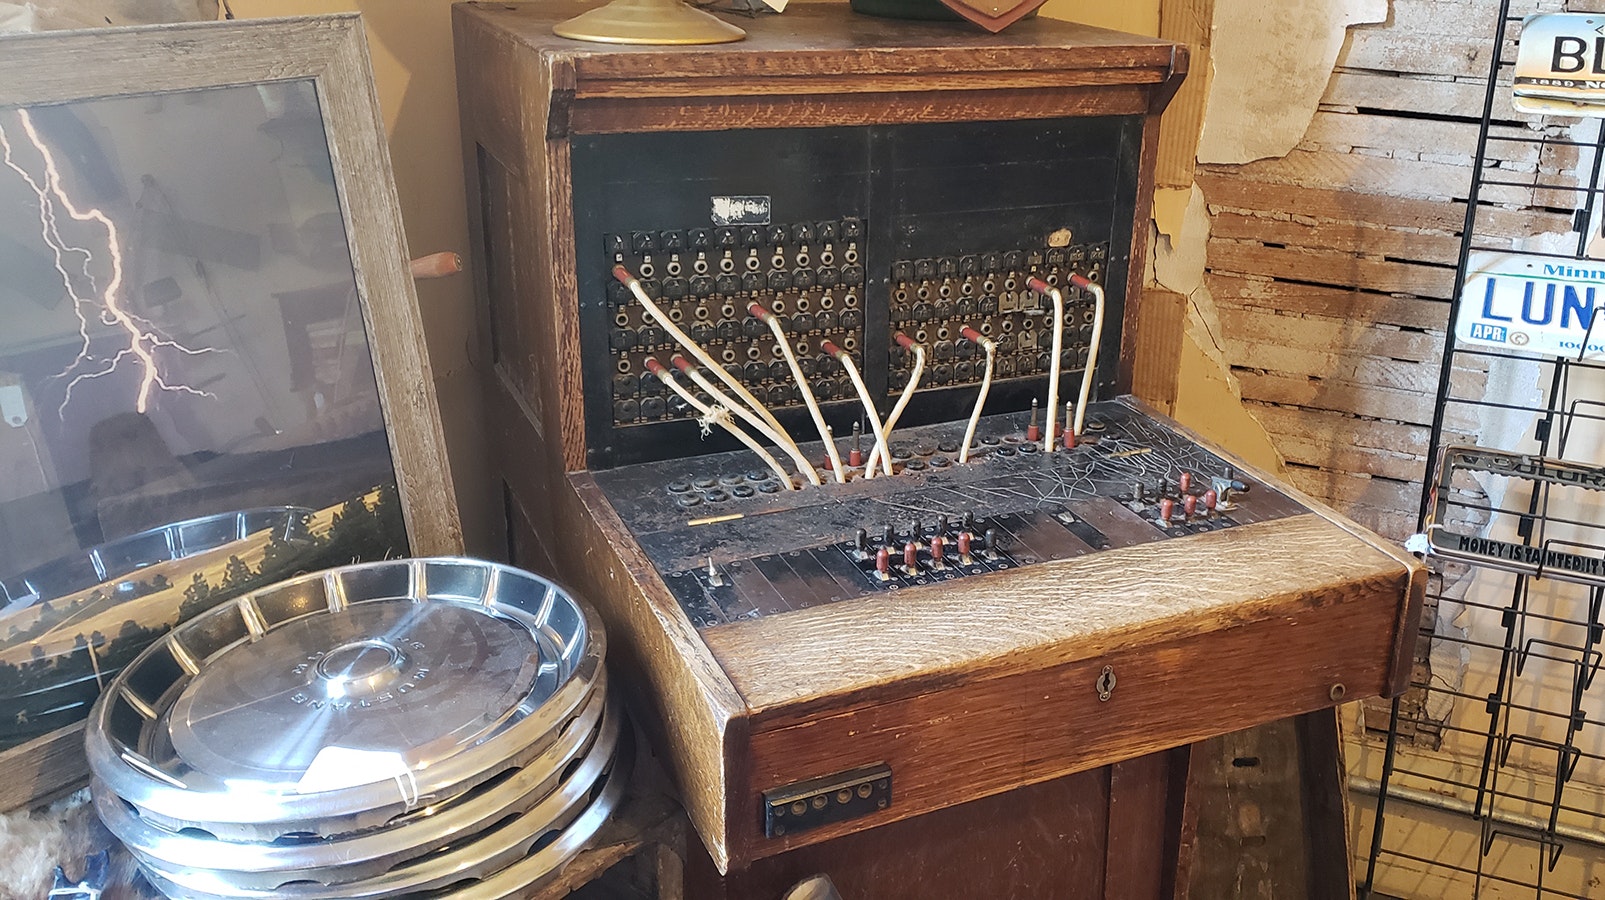 An old switchboard upstairs in the Aladdin General Store sandwiched between hubcaps, licenses plates and a print of lightning striking near Devils Tower.